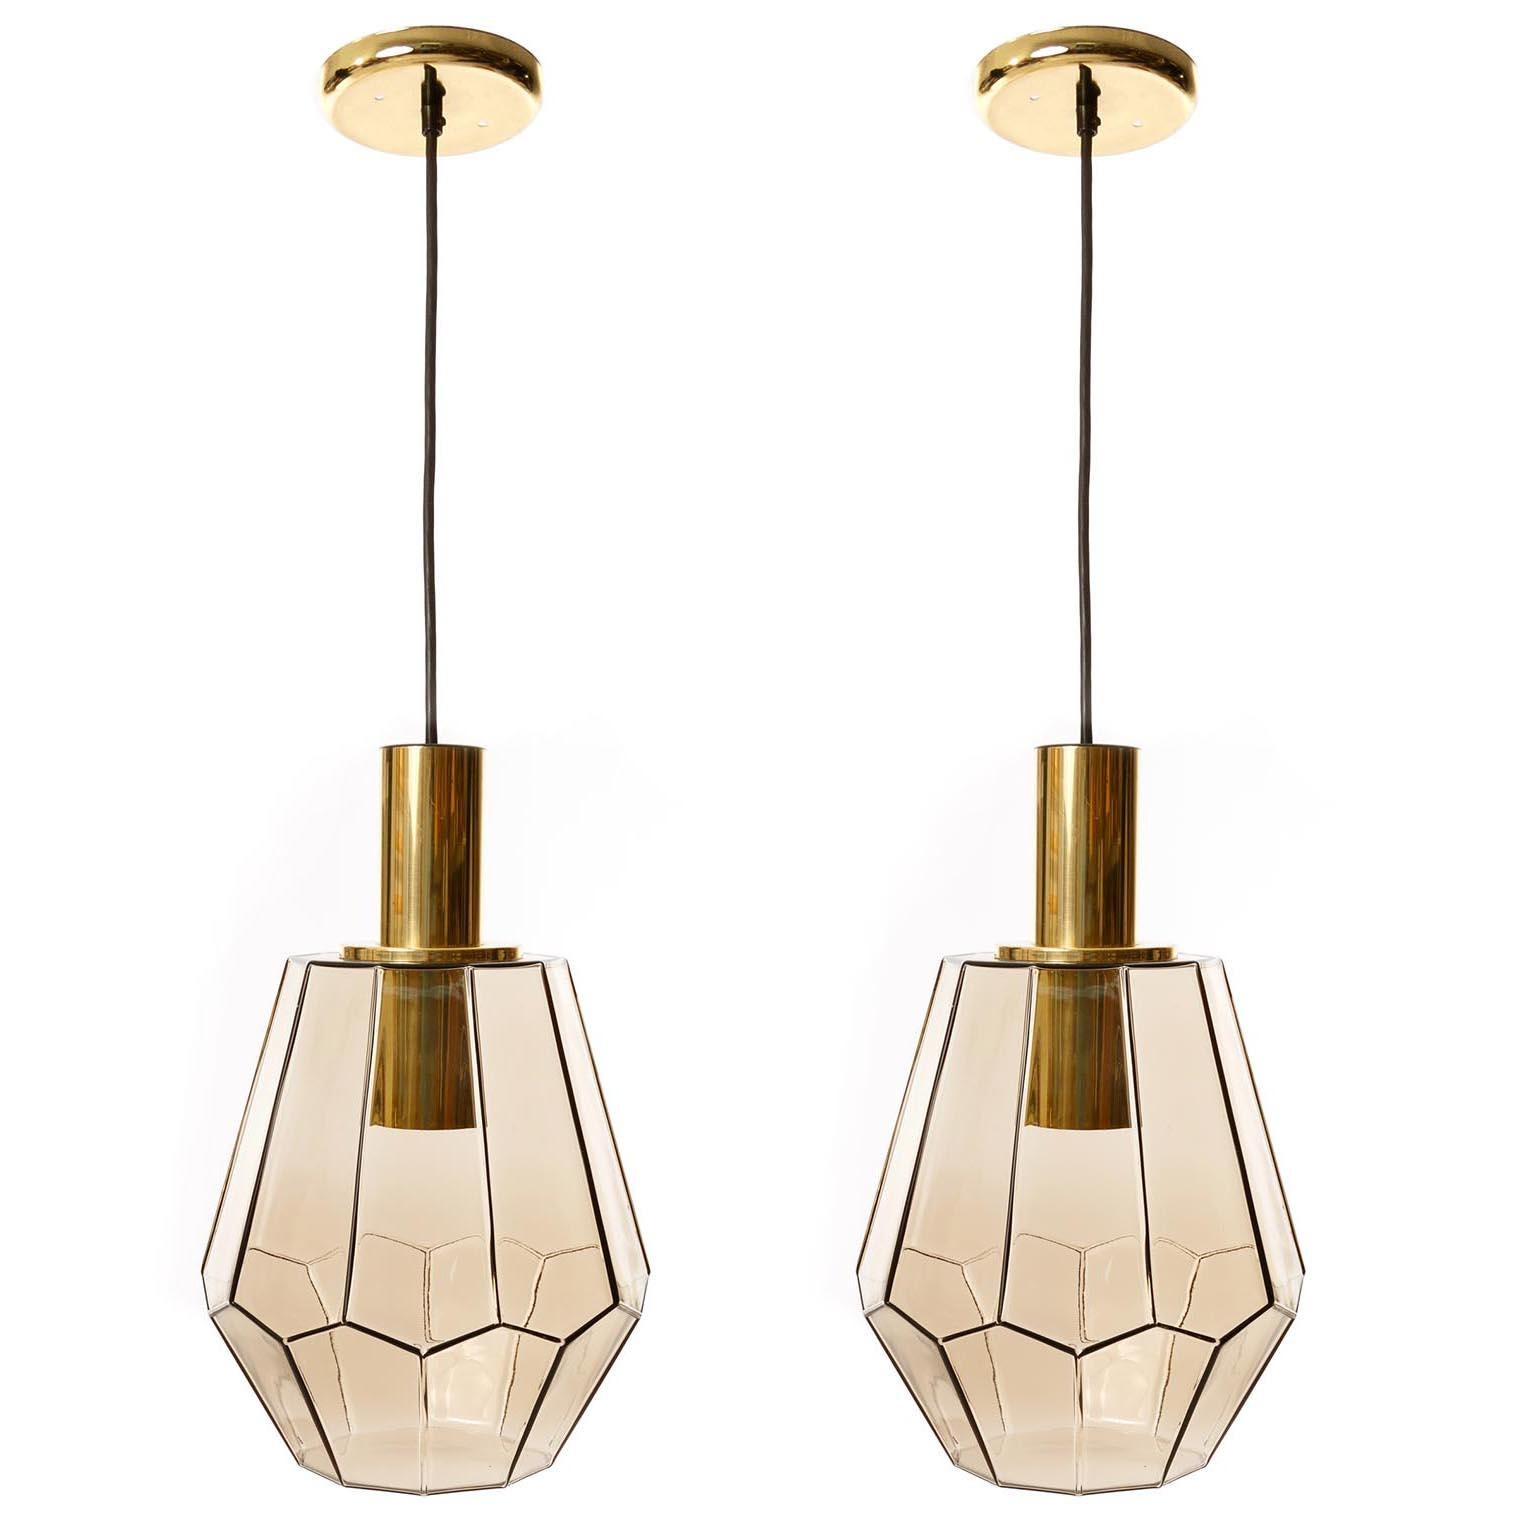 One of two brass and hand blown glass pendants by Glashütte Limburg, Germany, manufactured in midcentury, circa 1970.
The suspension and canopy are made of polished brass. The glass lamp shade is in a smoke / amber / topaz or brown amethyst